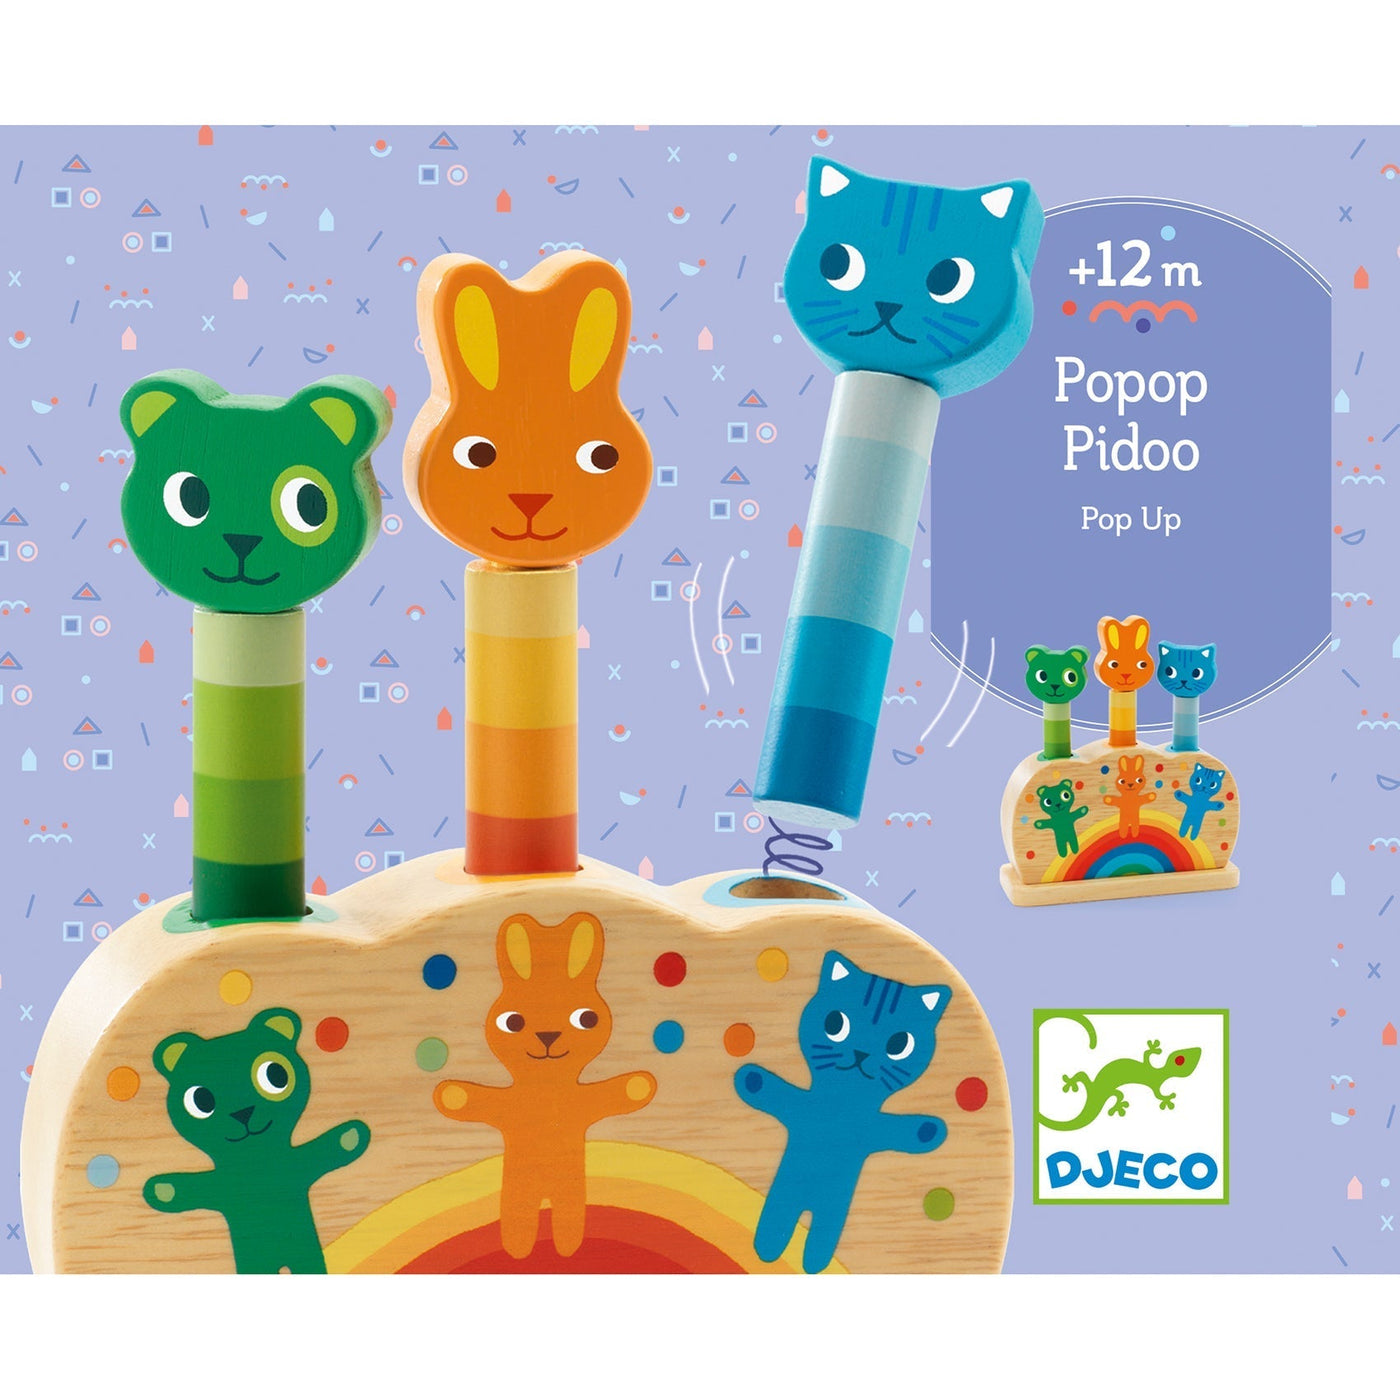 Pipop Pidoo - Early Years - Early Development Toys